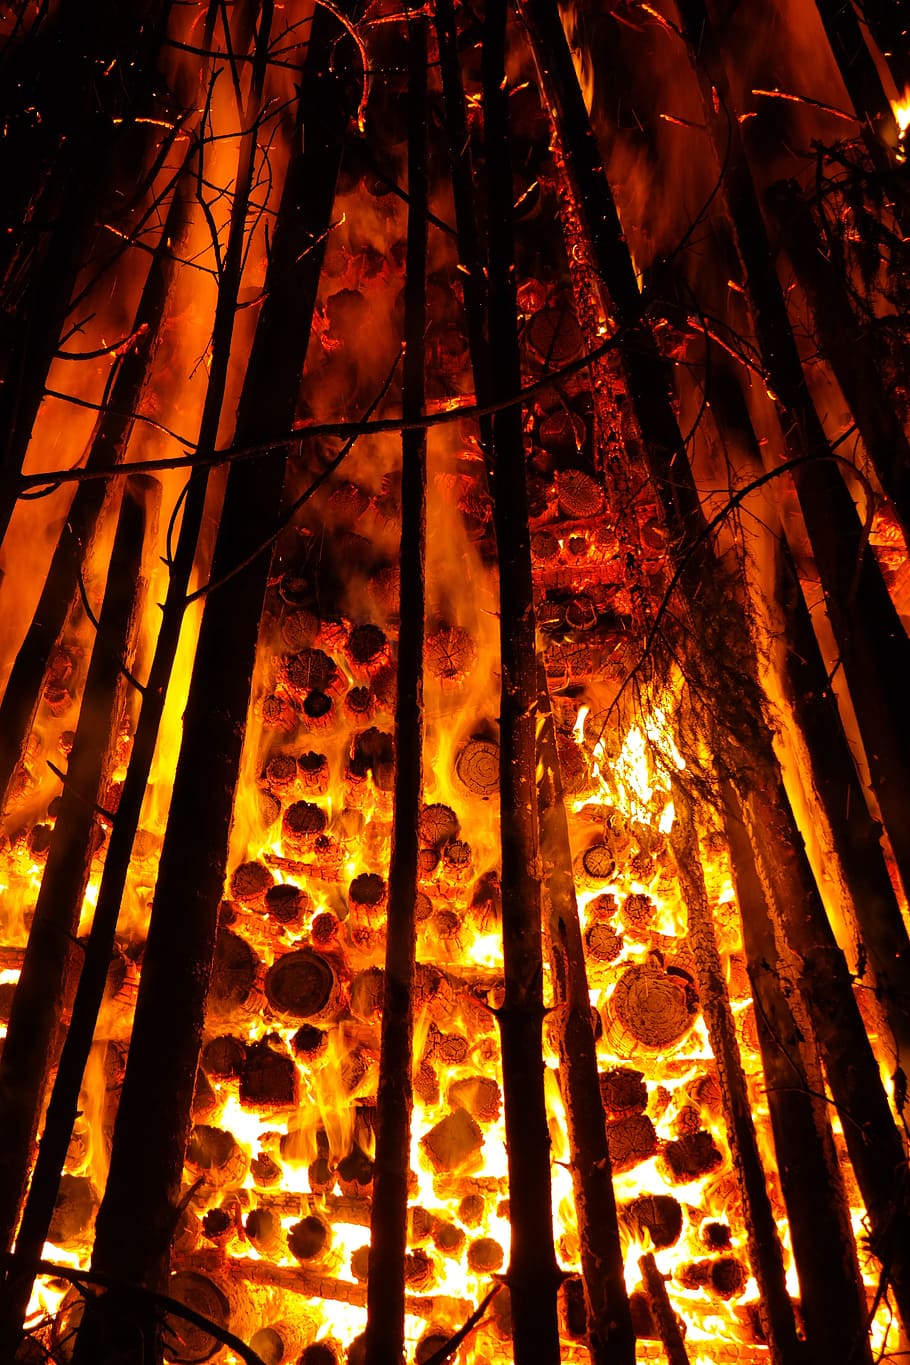 forest fire at night, embers, glow, wood, burn, holzstapel, glow oven